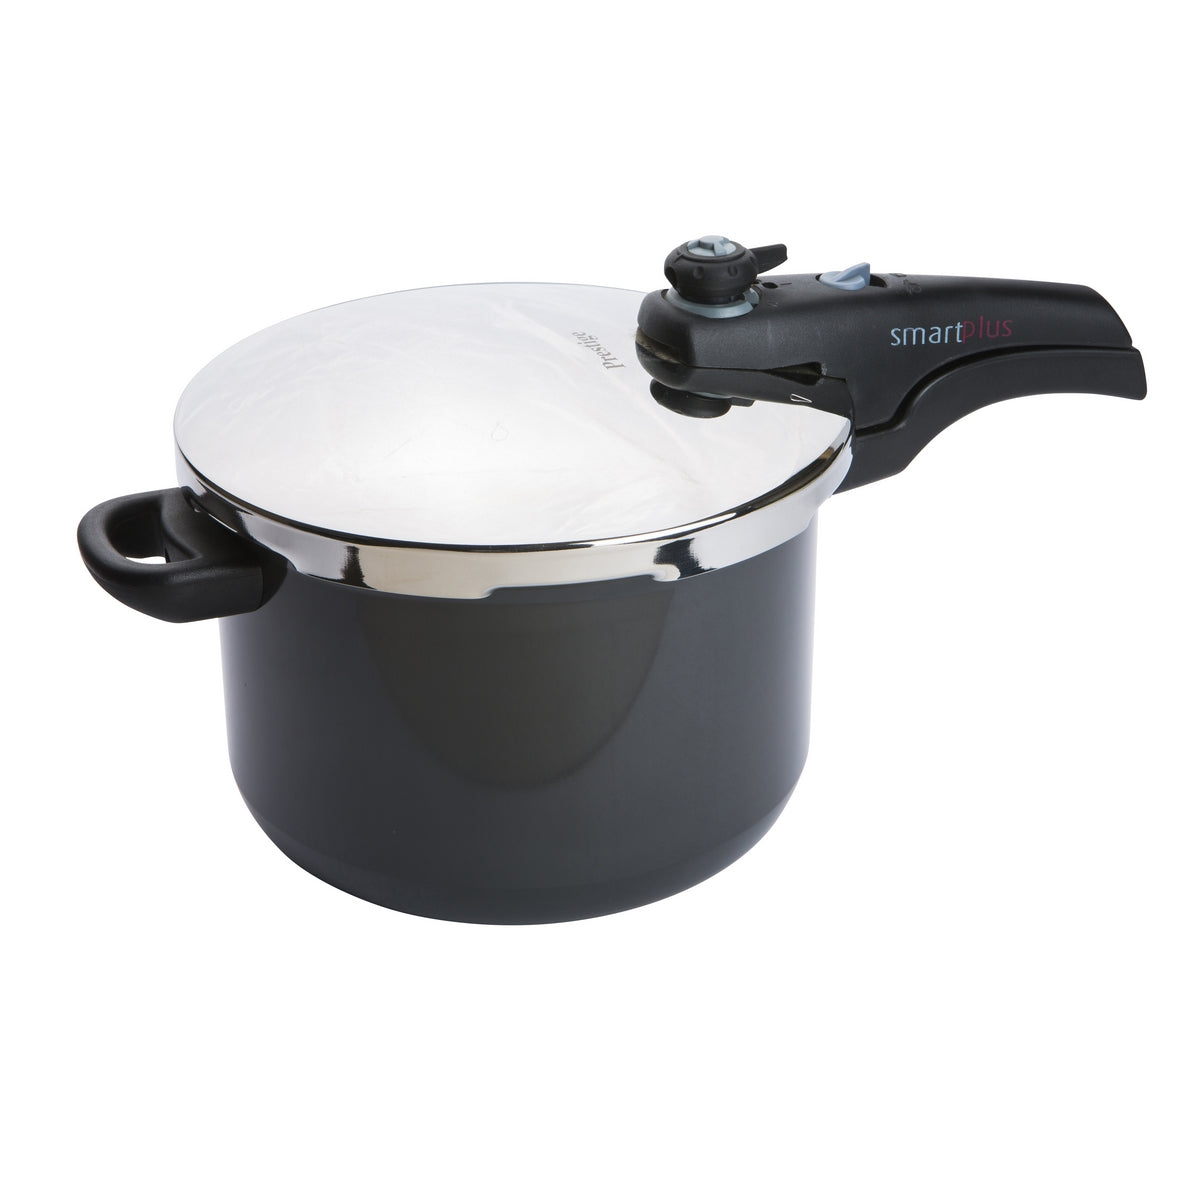 An image of Smart Plus Hard Anodised Non Stick Pressure Cooker